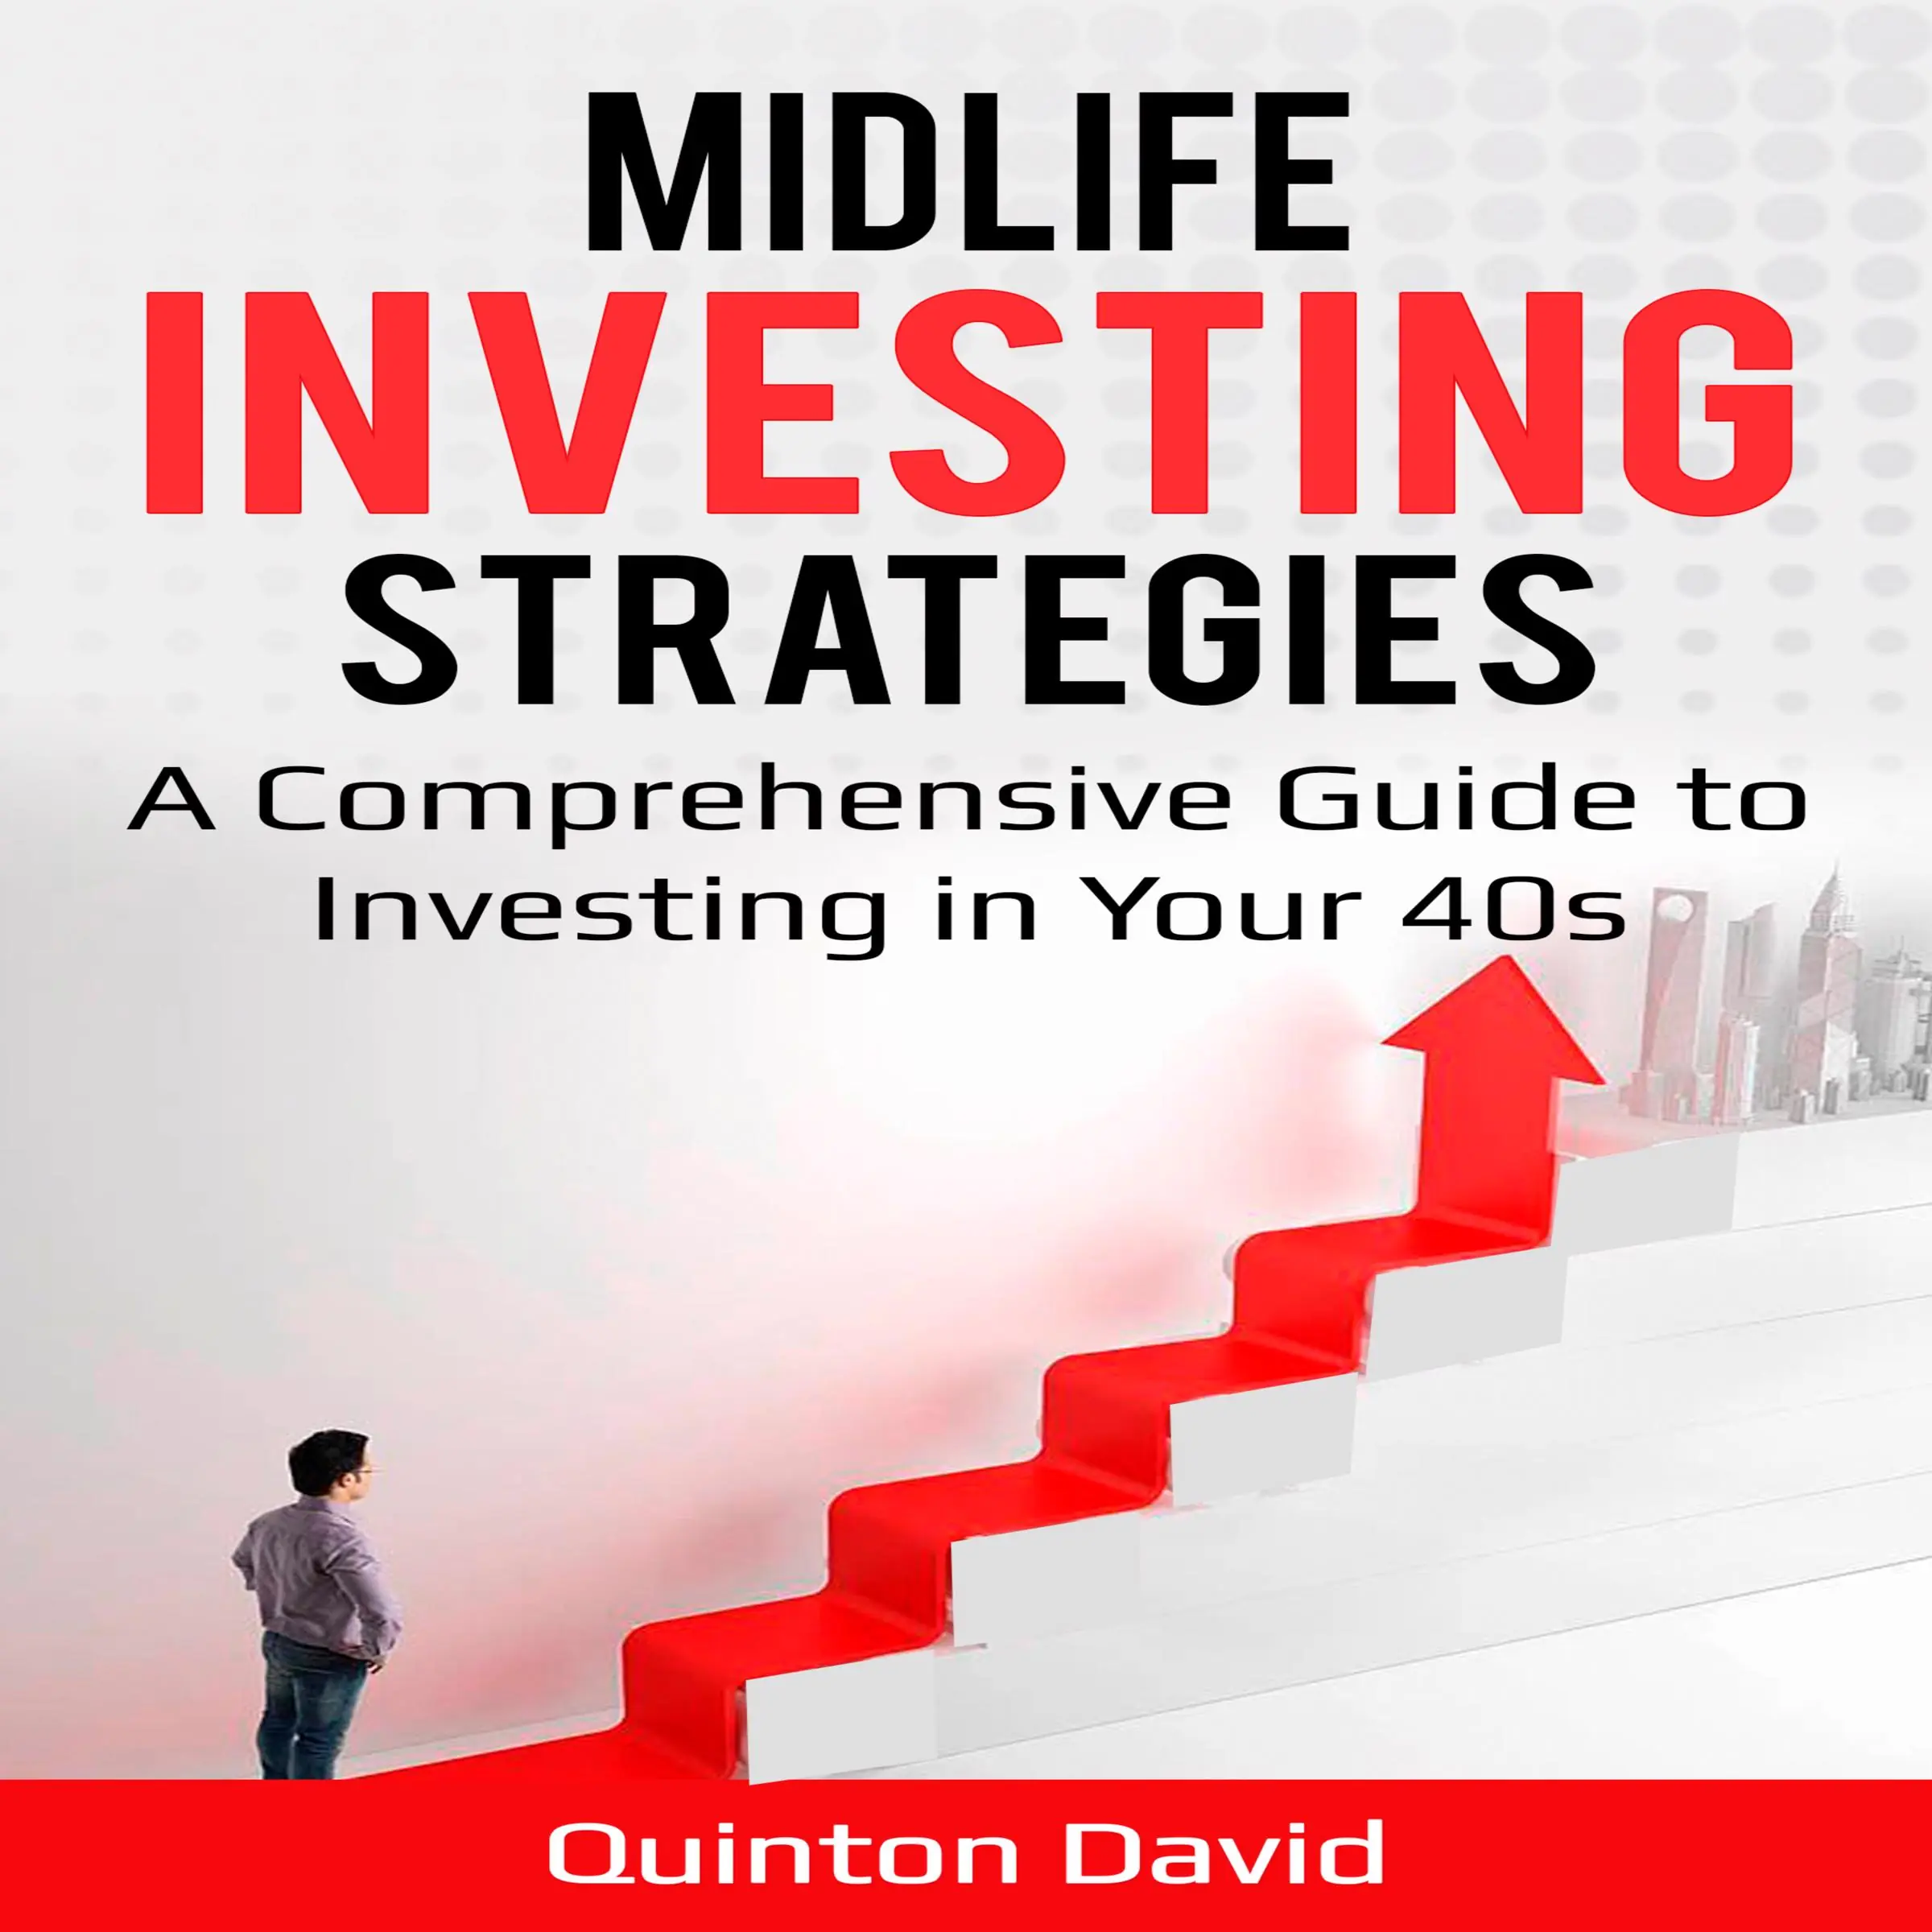 Midlife Investing Strategies A Comprehensive Guide to Investing in Your 40s by Quinton David Audiobook